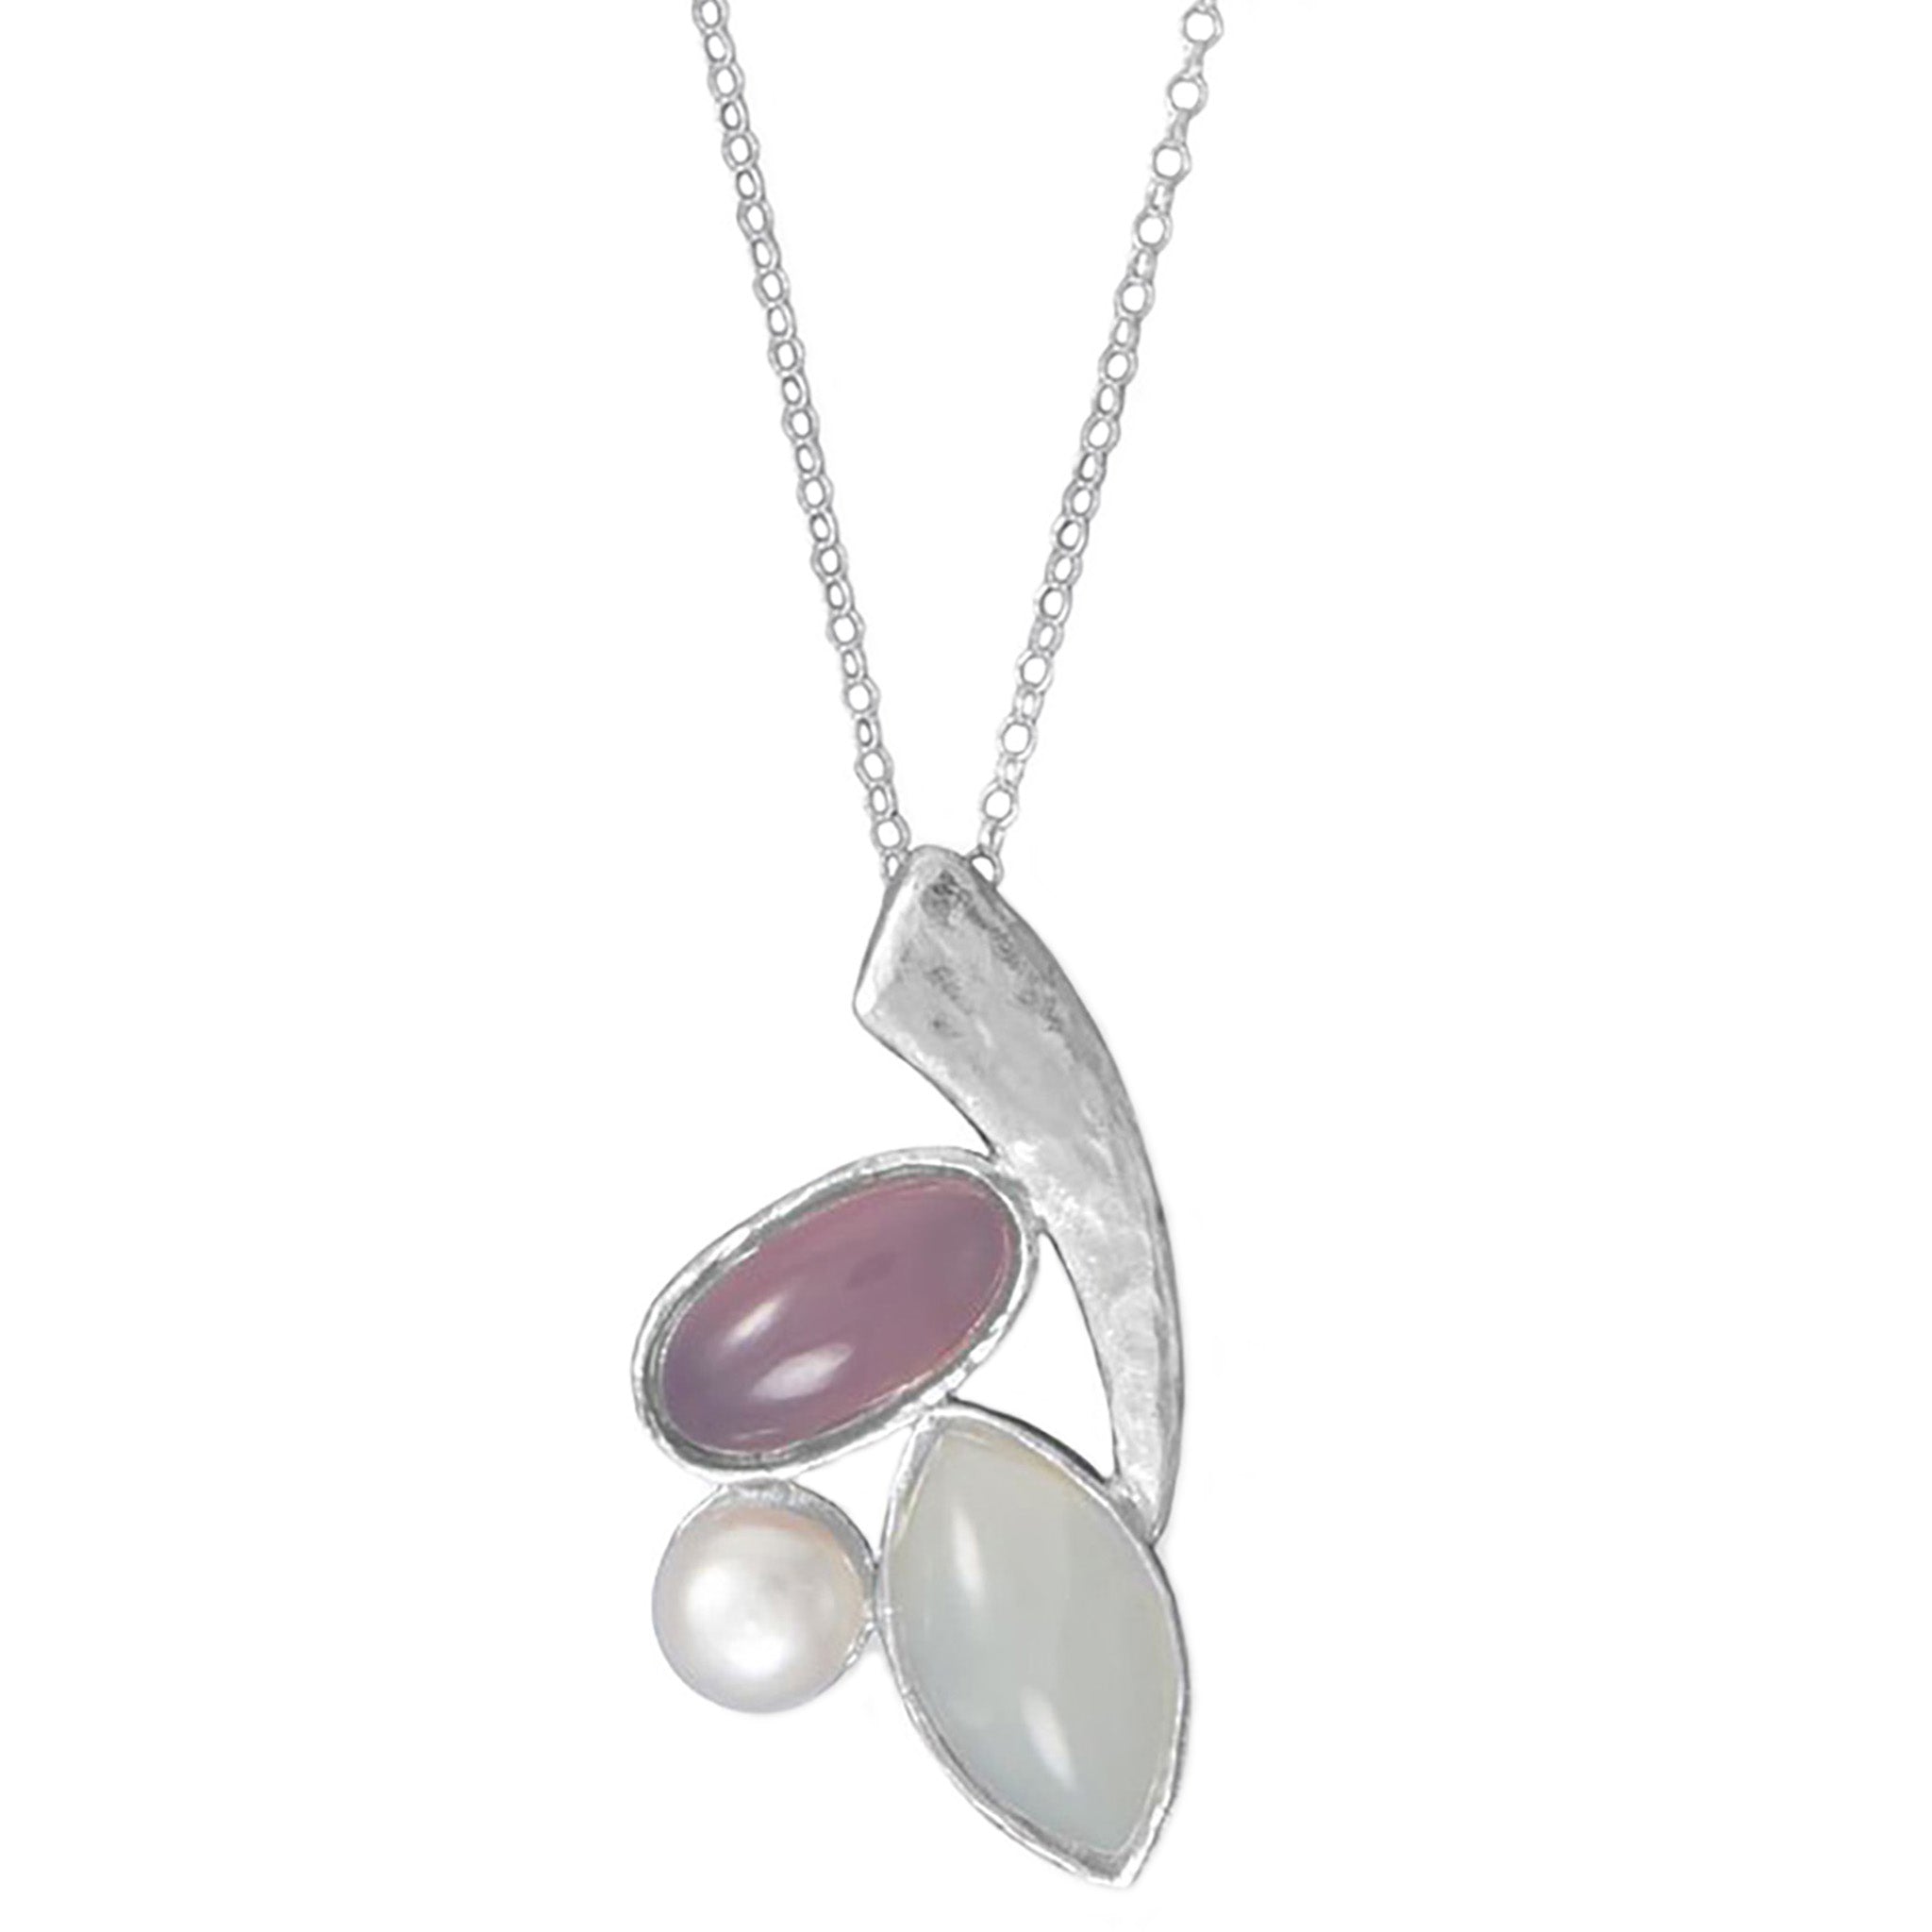 Moonstone and Chalcedony Pendant Necklace